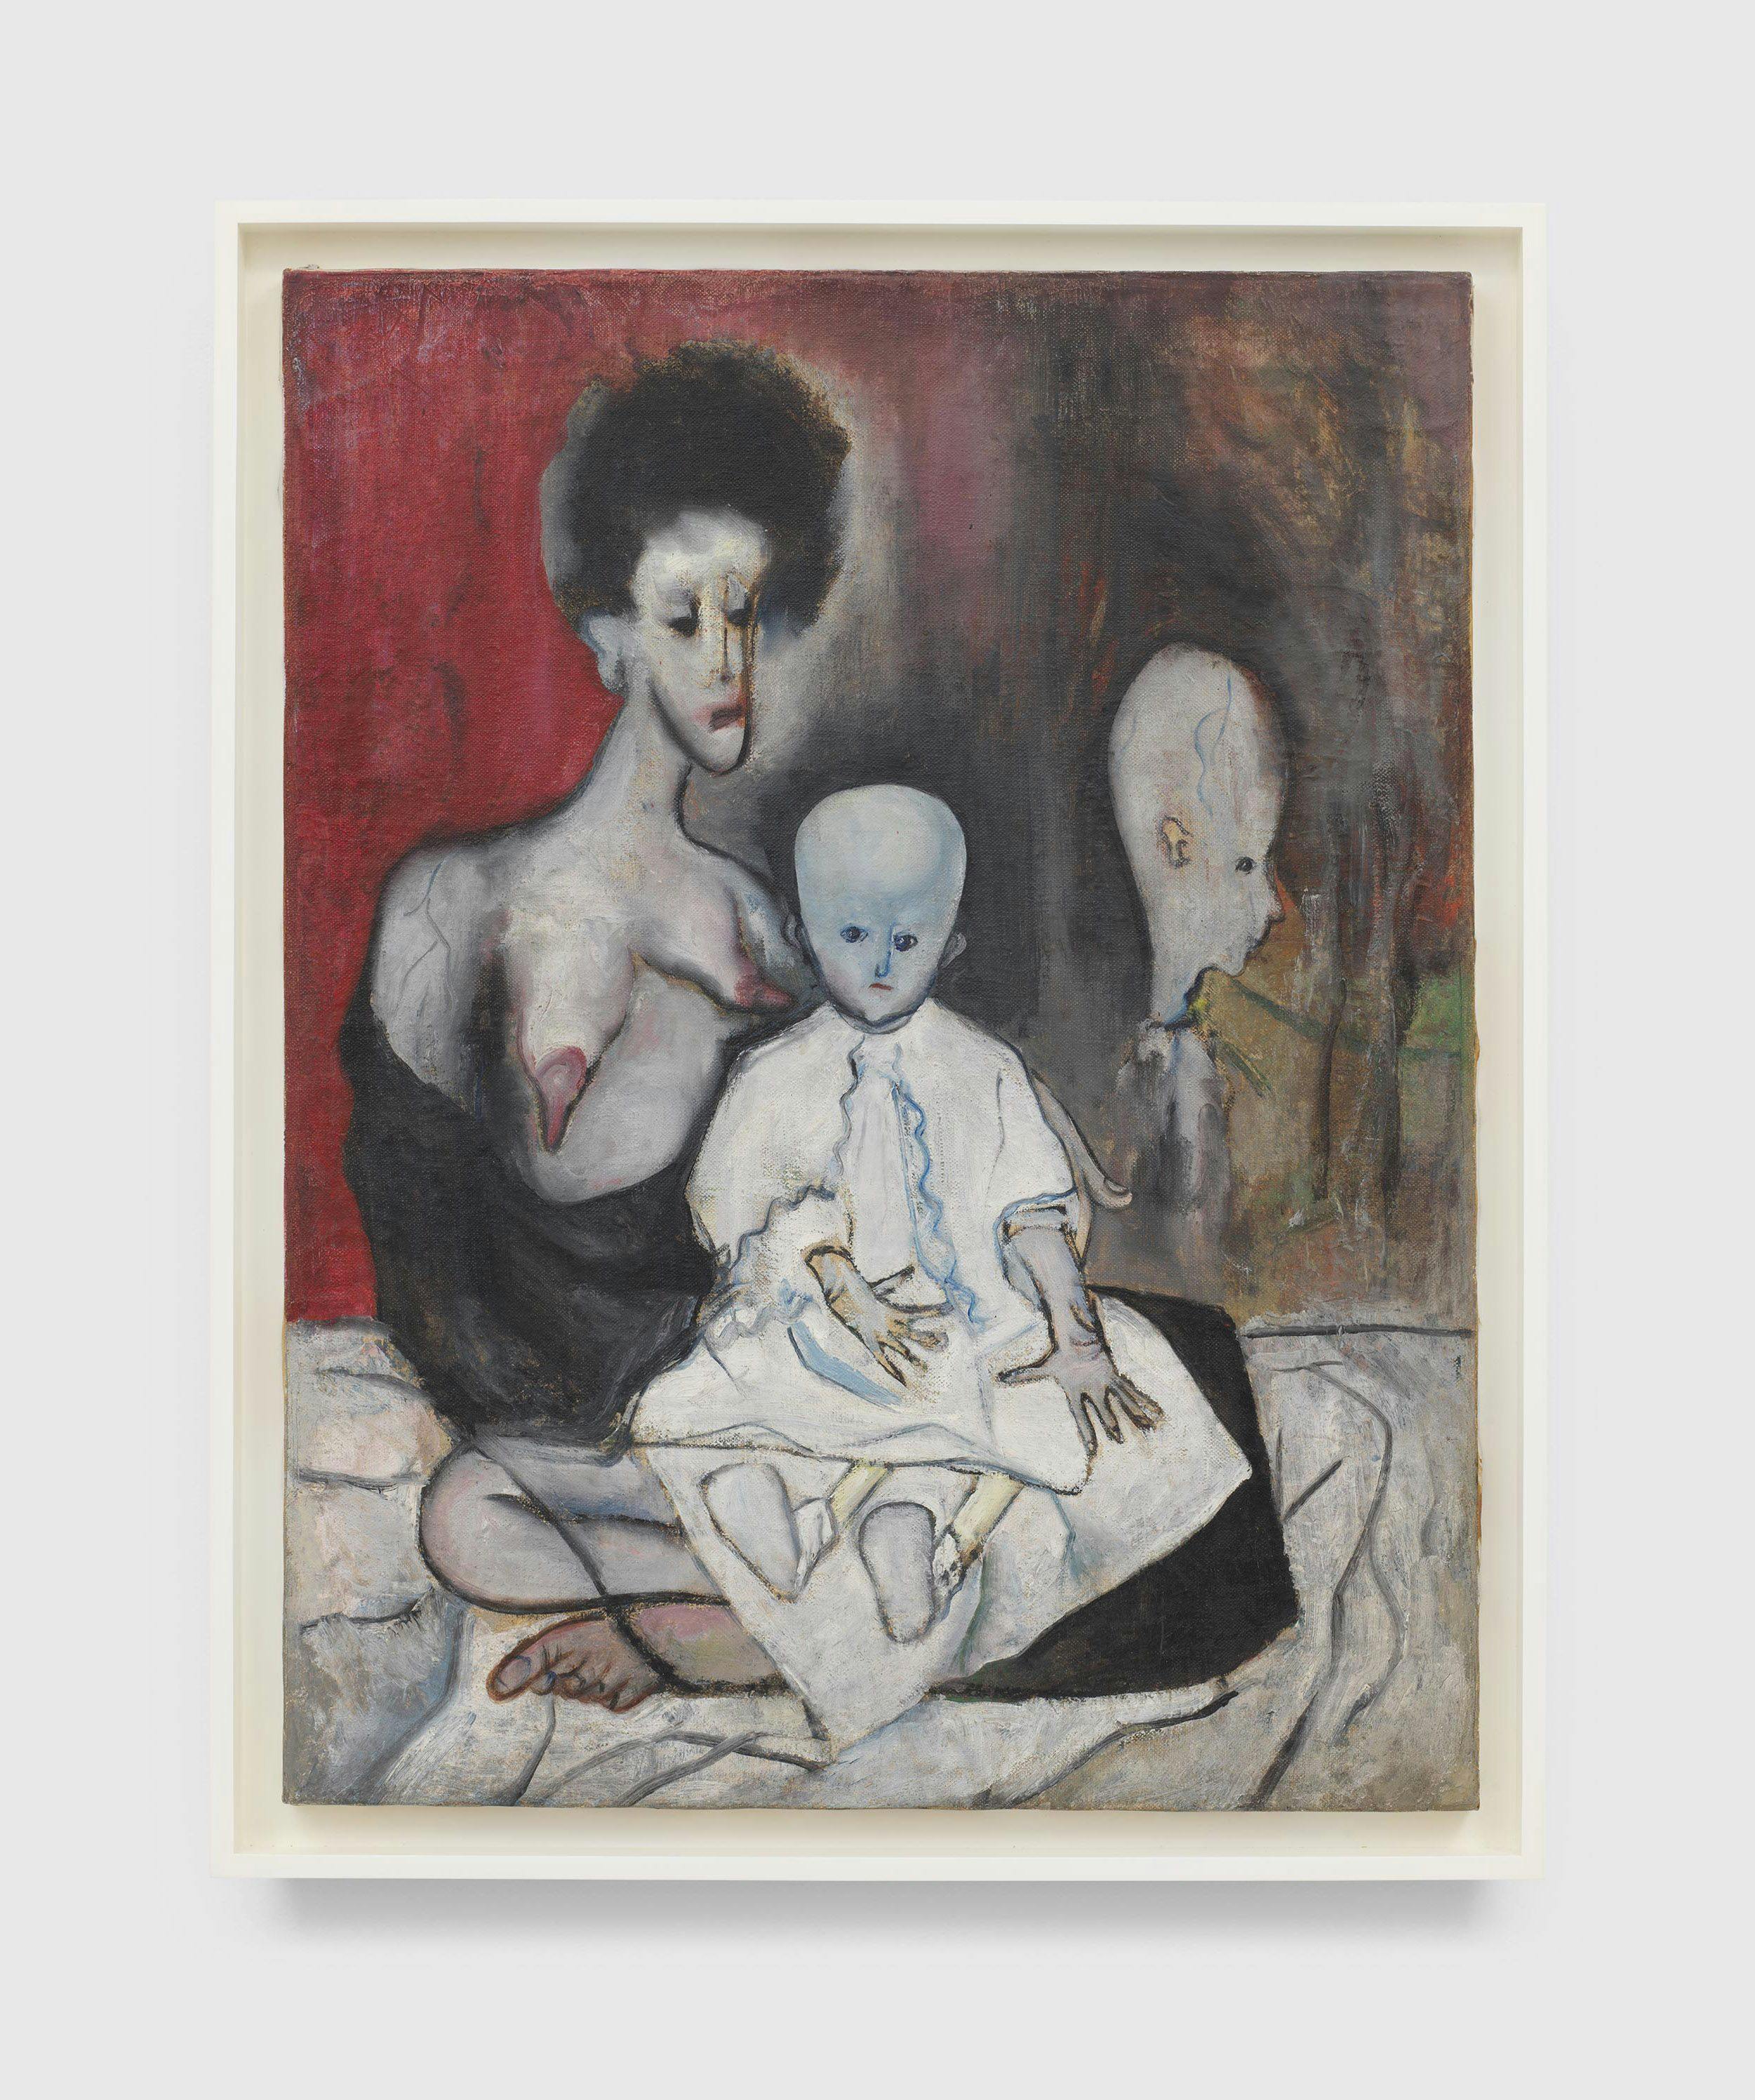 A painting by Alice, titled Neel Degenerate Madonna, dated 1930.